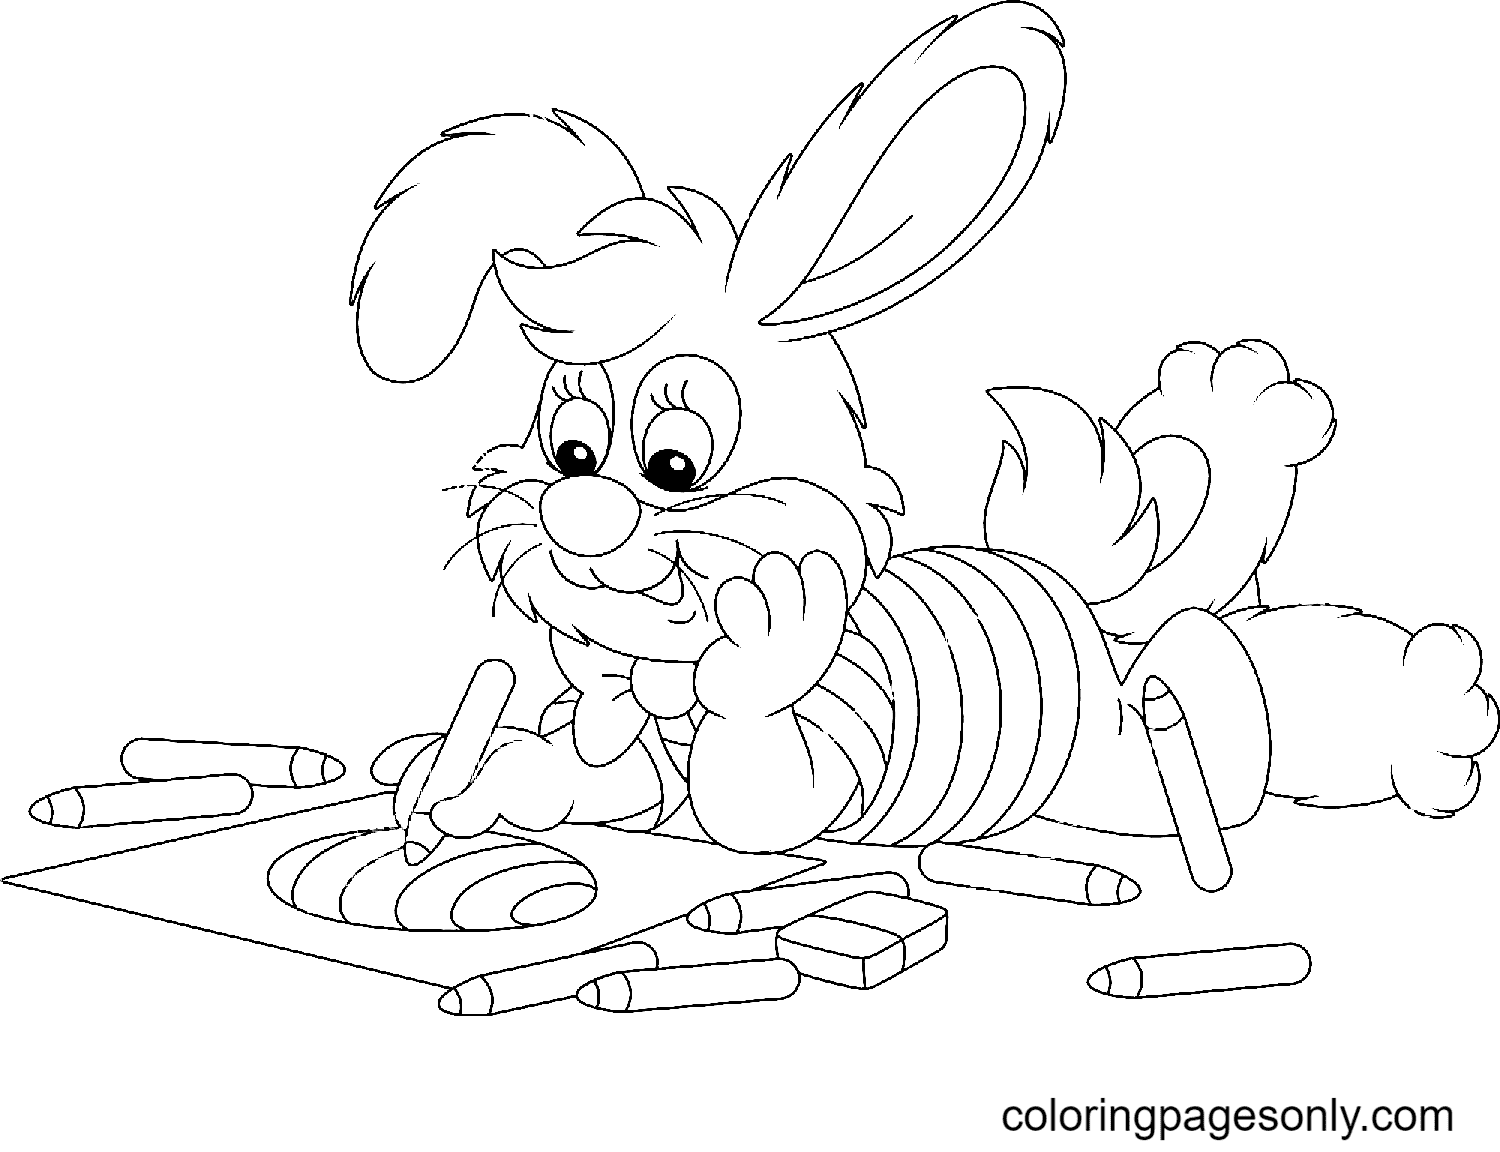 Easter Bunny Smiling and Drawing an Egg with Crayons Coloring Page